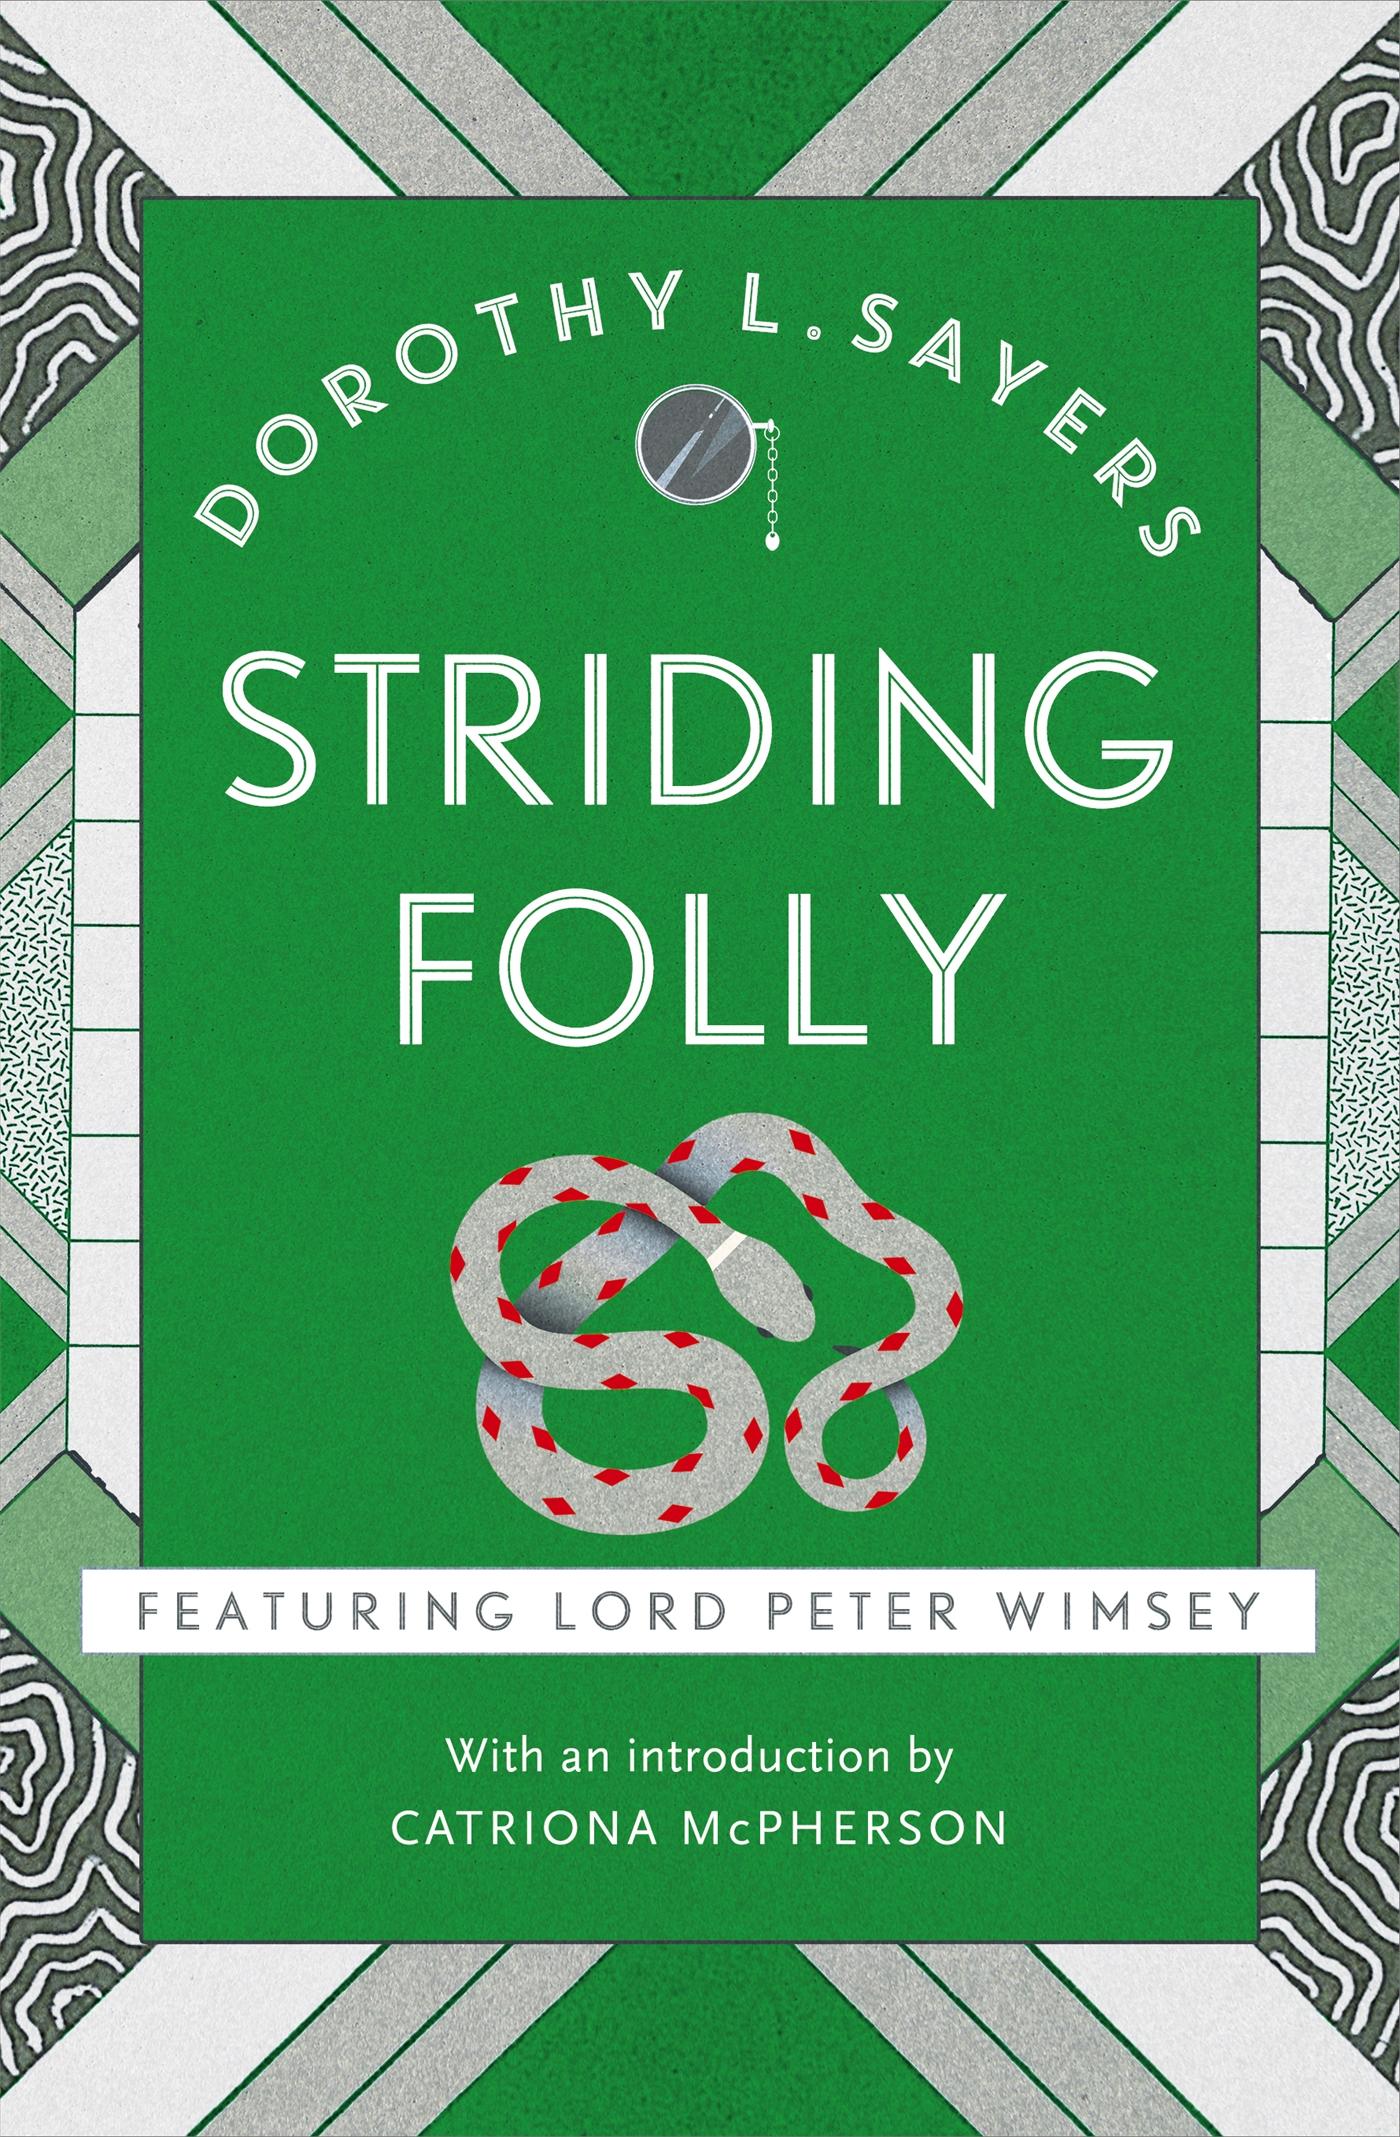 Striding Folly  Classic crime fiction you need to read  Dorothy L Sayers  Taschenbuch  Lord Peter Wimsey Mysteries  Englisch  2017  Hodder & Stoughton  EAN 9781473621510 - Sayers, Dorothy L